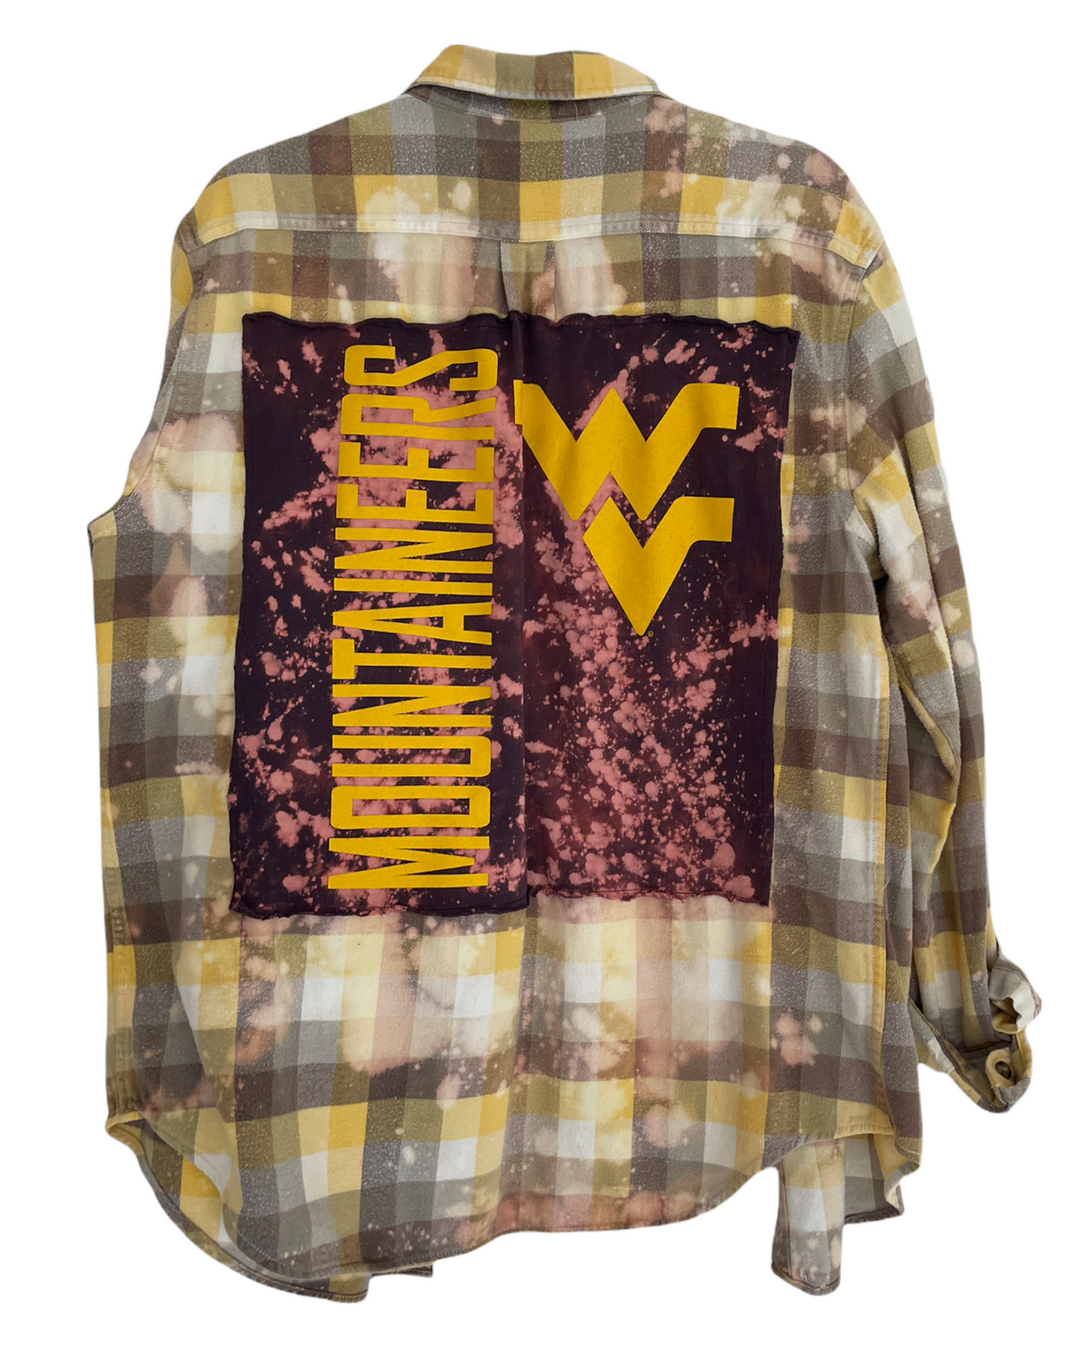 West Virginia Patched Flannel